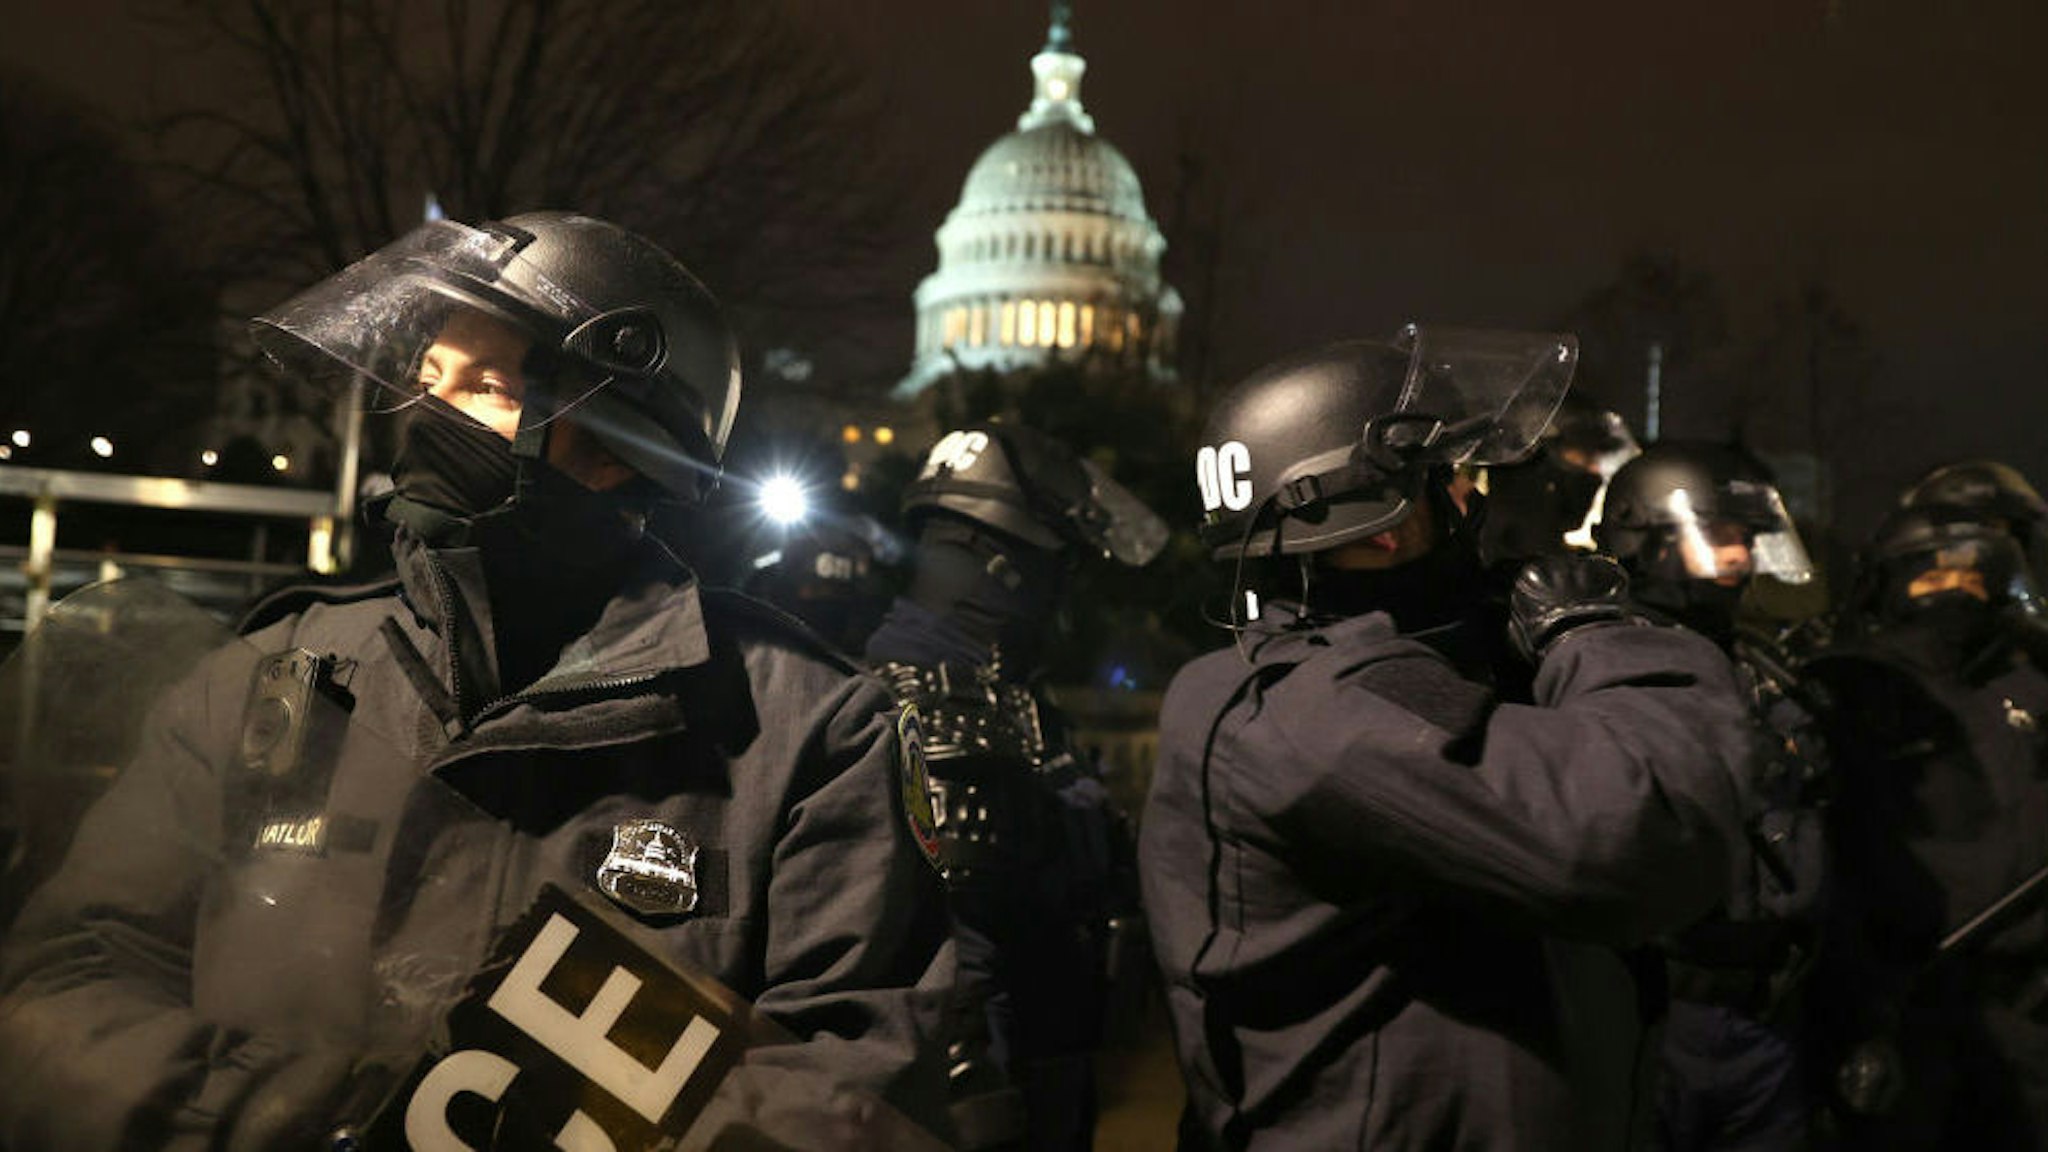 WASHINGTON, DC - JANUARY 06: Police officers in riot gear work to disperse protesters who are gathering at the U.S. Capitol Building on January 06, 2021 in Washington, DC. Pro-Trump protesters entered the U.S. Capitol building after mass demonstrations in the nation's capital during a joint session Congress to ratify President-elect Joe Biden's 306-232 Electoral College win over President Donald Trump.